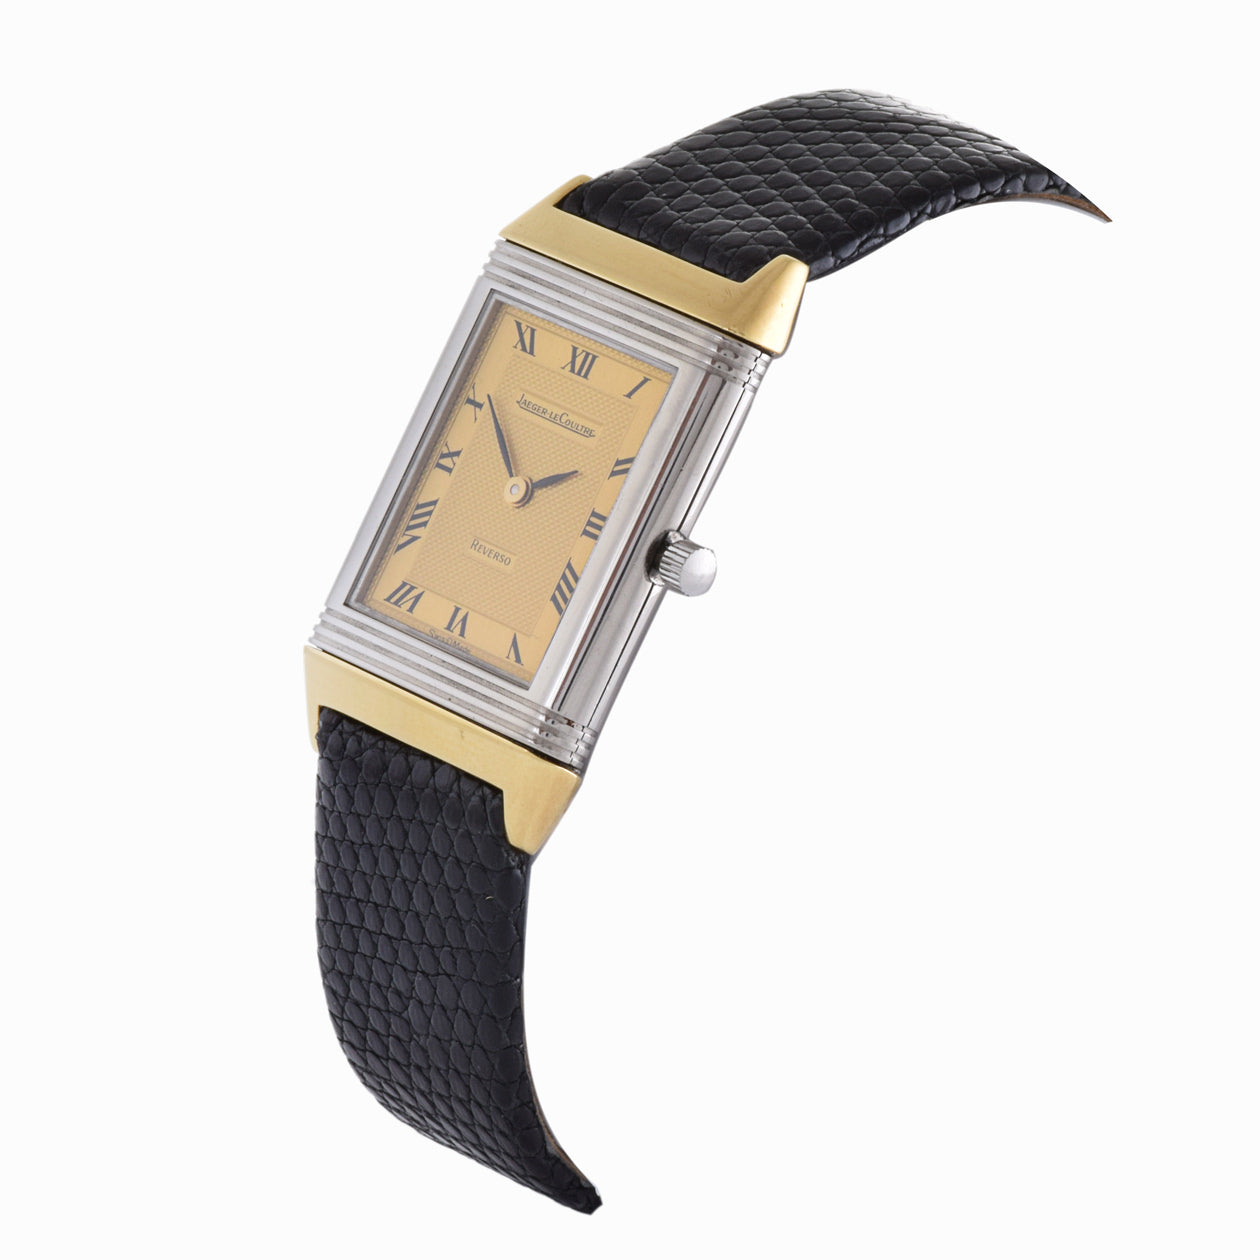 AN Reverso Flip Dual Time Zone Frank Miura Dice Watch With White Dial And  Cal.854A/2 Mechanical Hand Winding In Rose Gold From Trustytime001, $521.77  | DHgate.Com